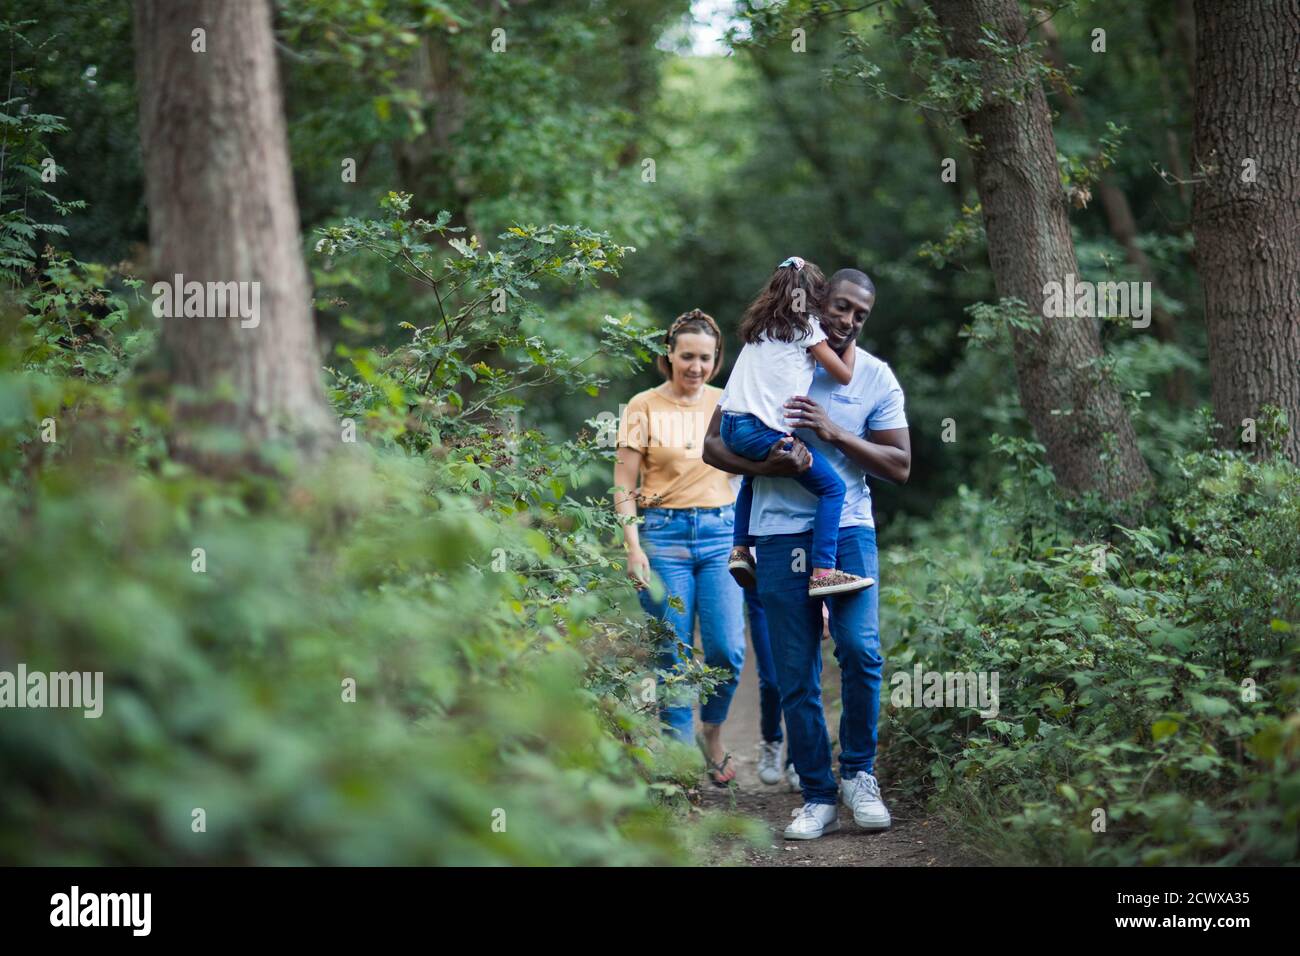 Family hiking on trail in woods Stock Photo